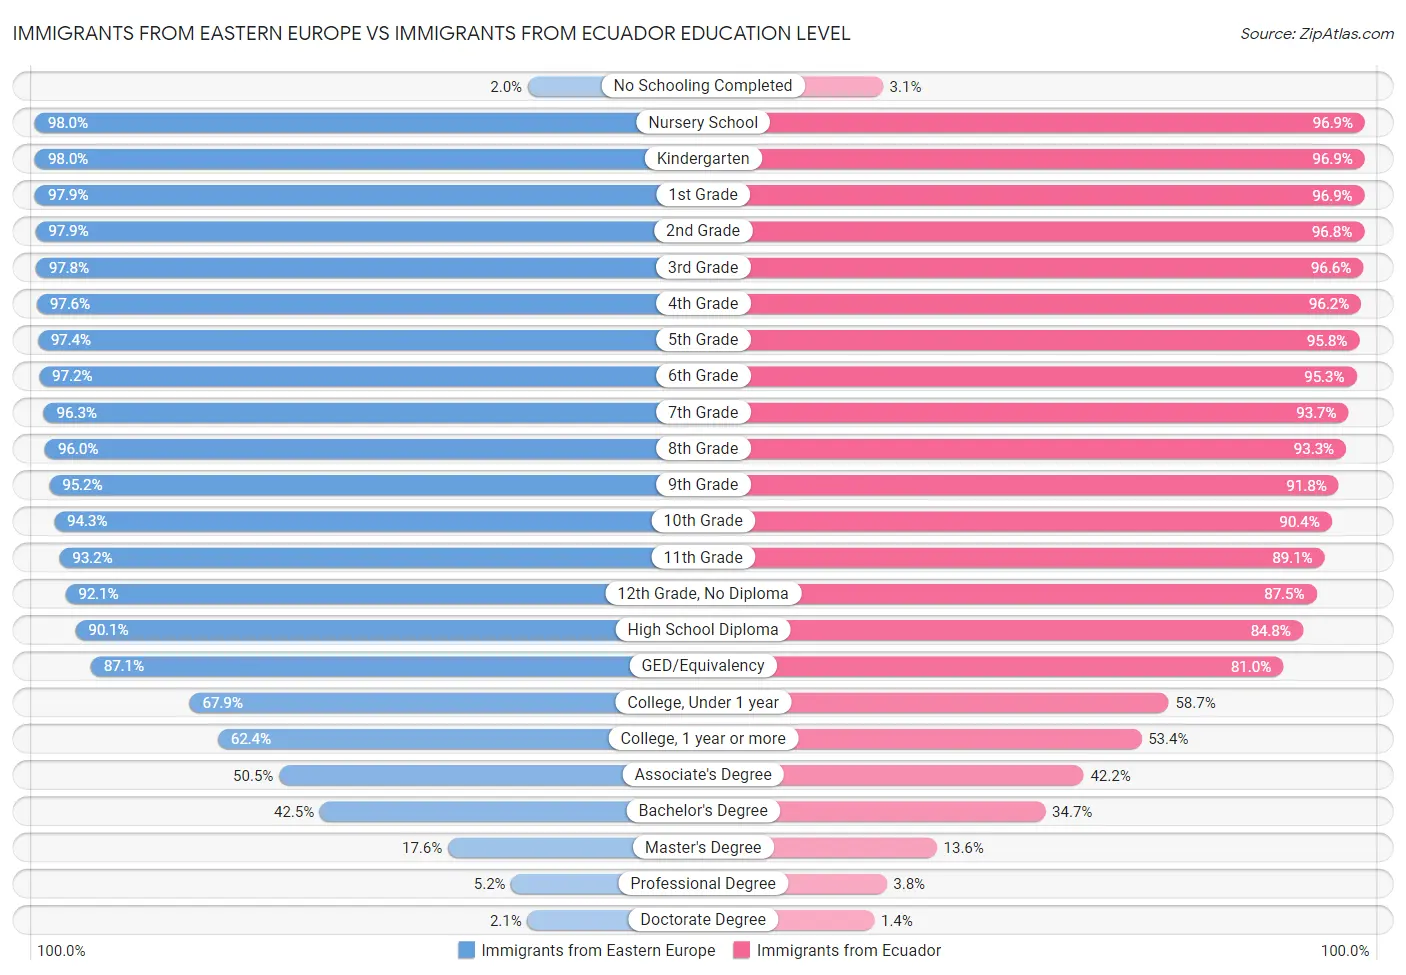 Immigrants from Eastern Europe vs Immigrants from Ecuador Education Level